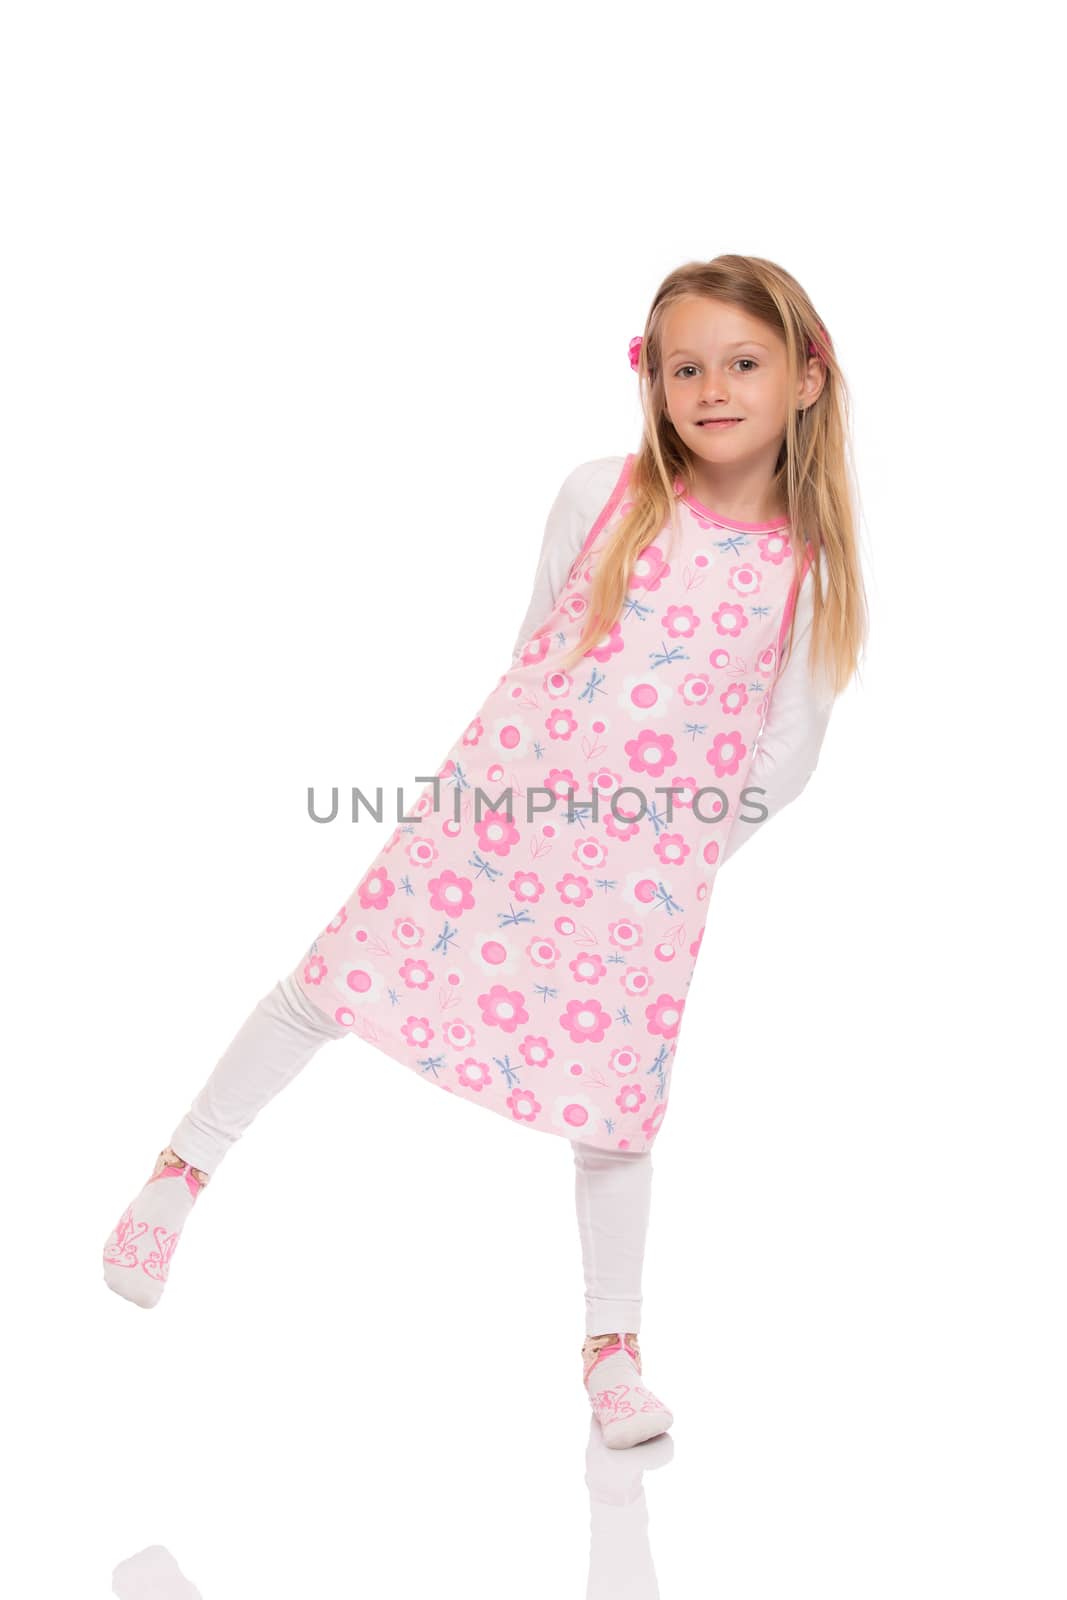 Full length portrait of a little girl with long hair wearing summer dress and balancing at one leg. Isolated on white background.